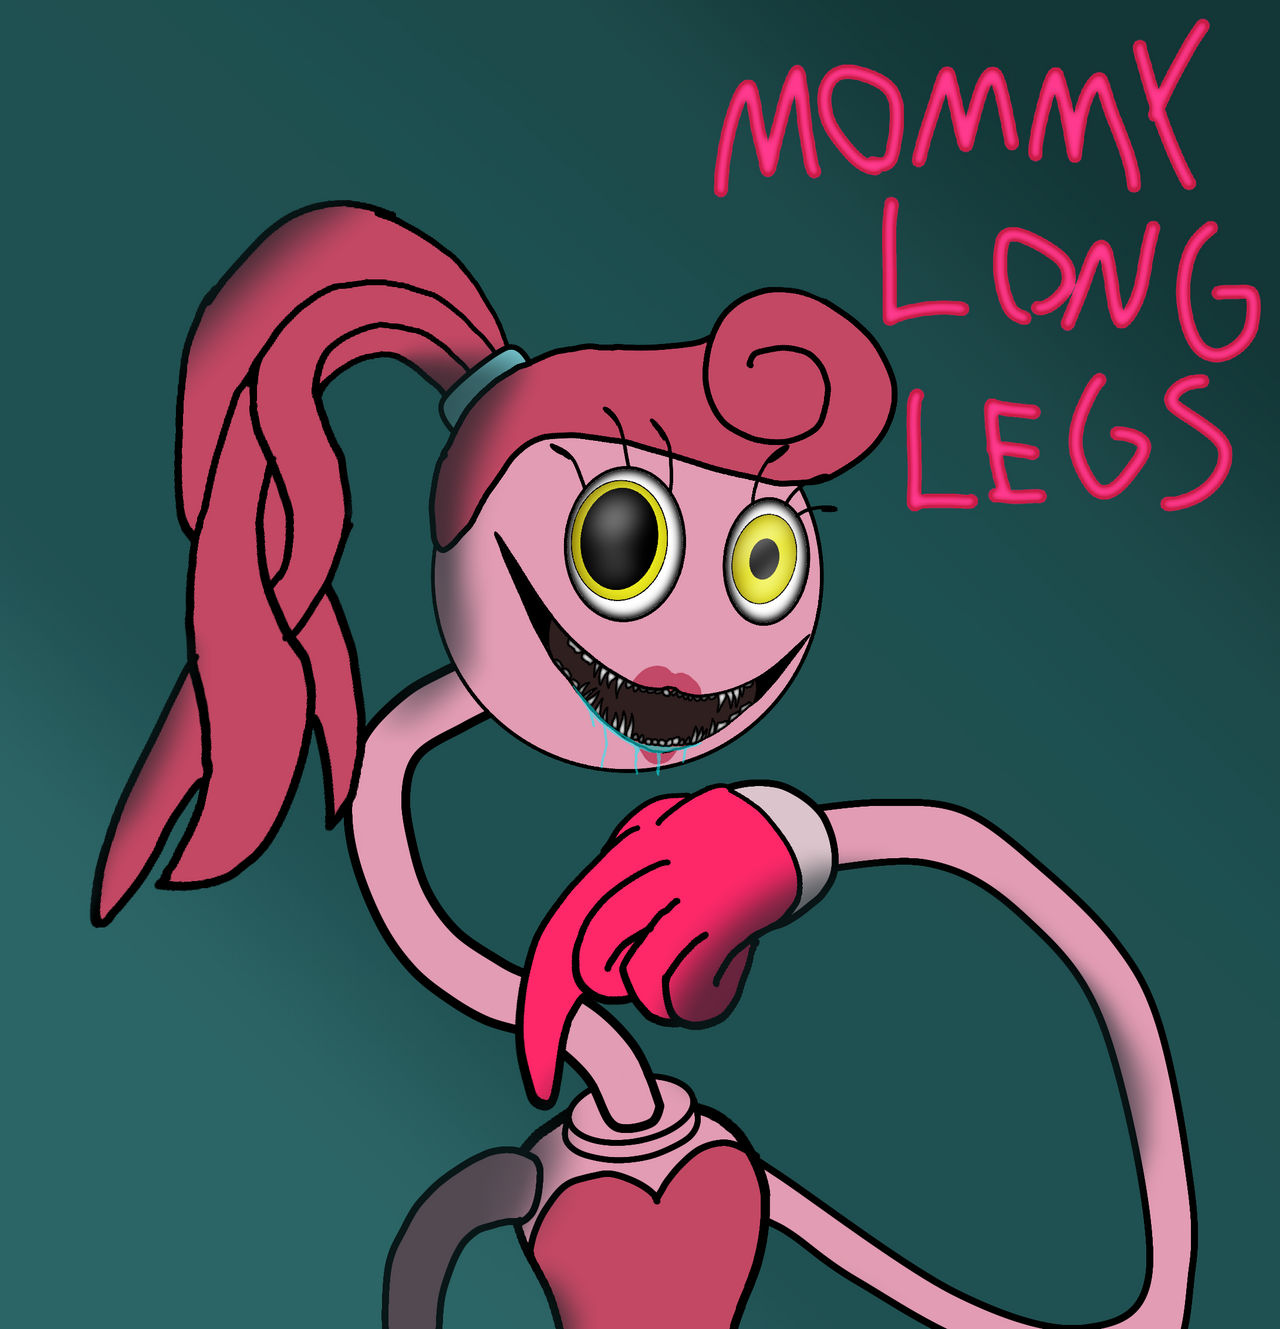 MOMMY LONG LEGS IS HERE AND SHE IS TERRIFYING. - POPPY PLAYTIME